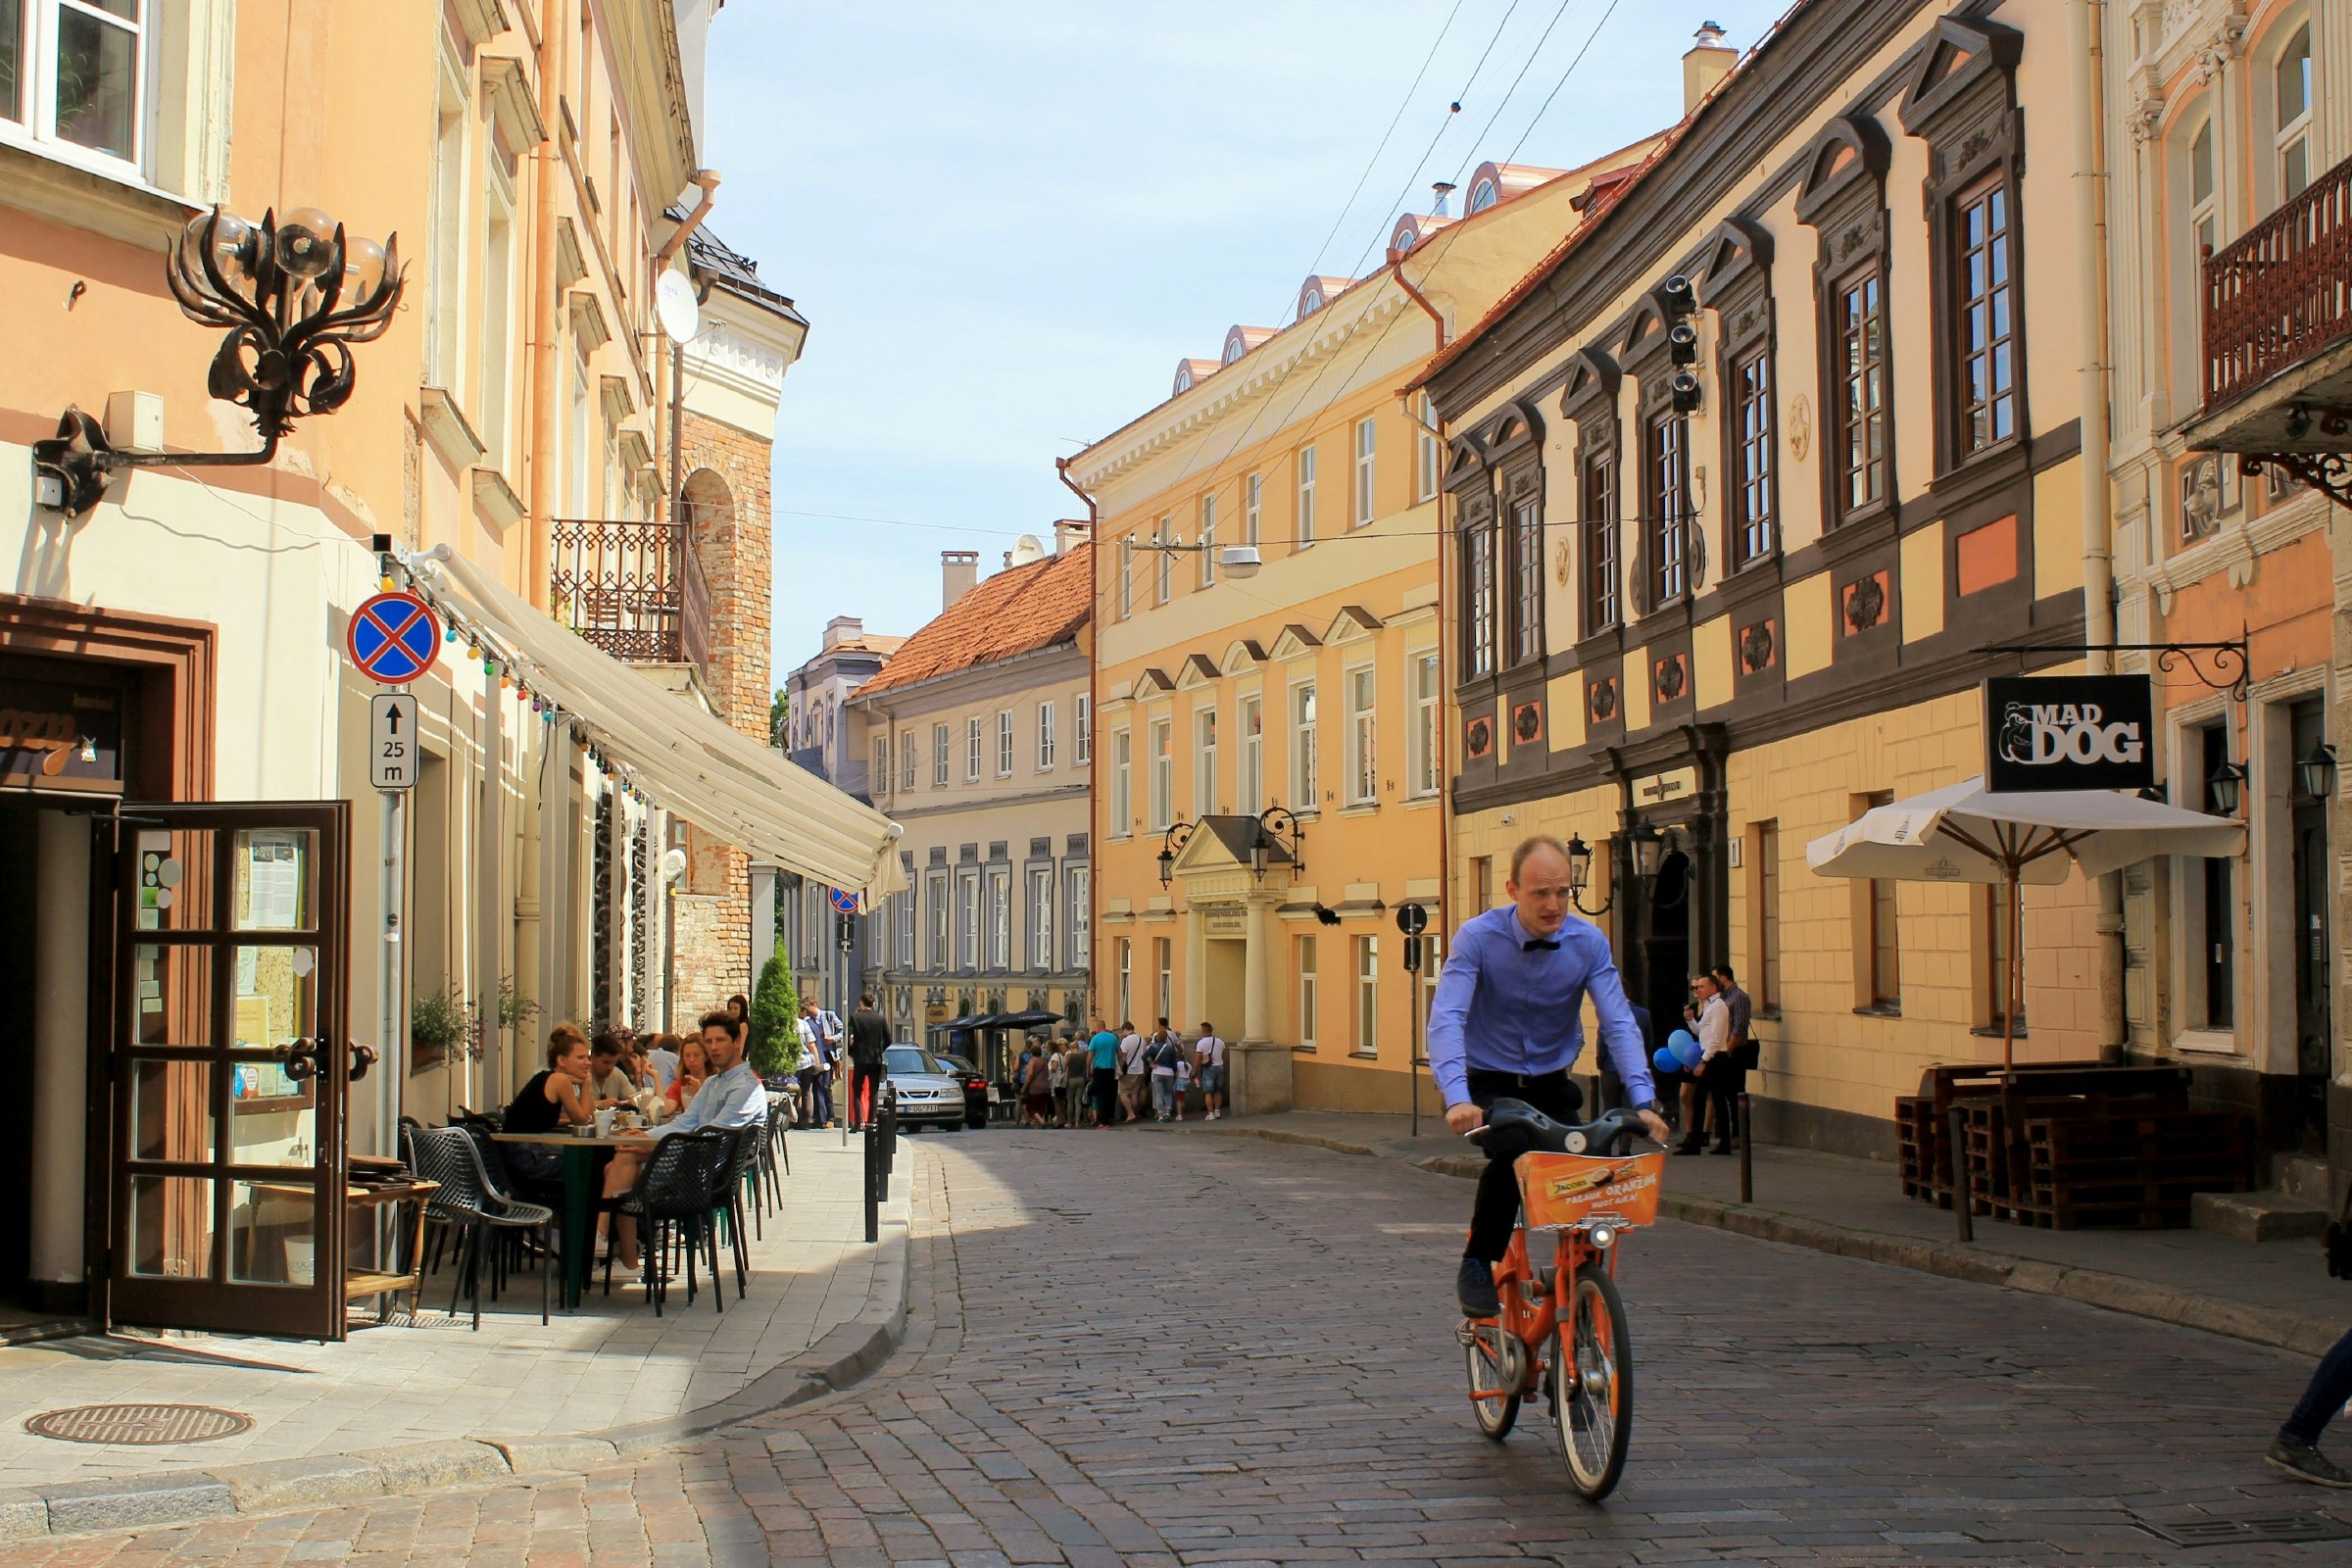 A man rides his bike through a street in Old Town Vilnius, as people sit at a cafe. 